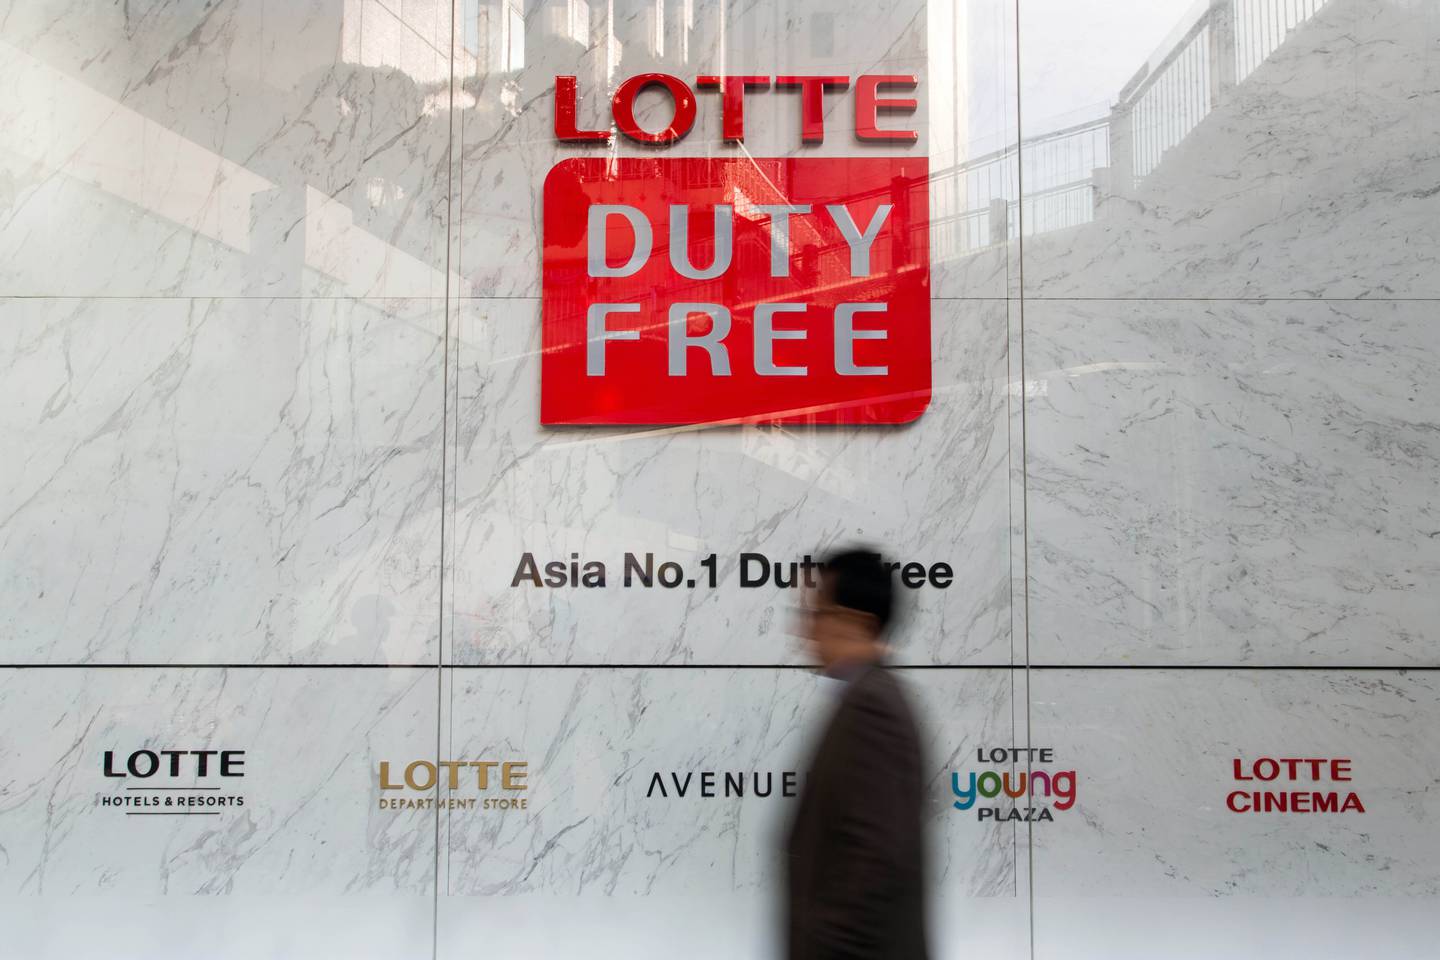 A man walks past signage for a Hotel Lotte Co. Duty Free store in Seoul, South Korea.